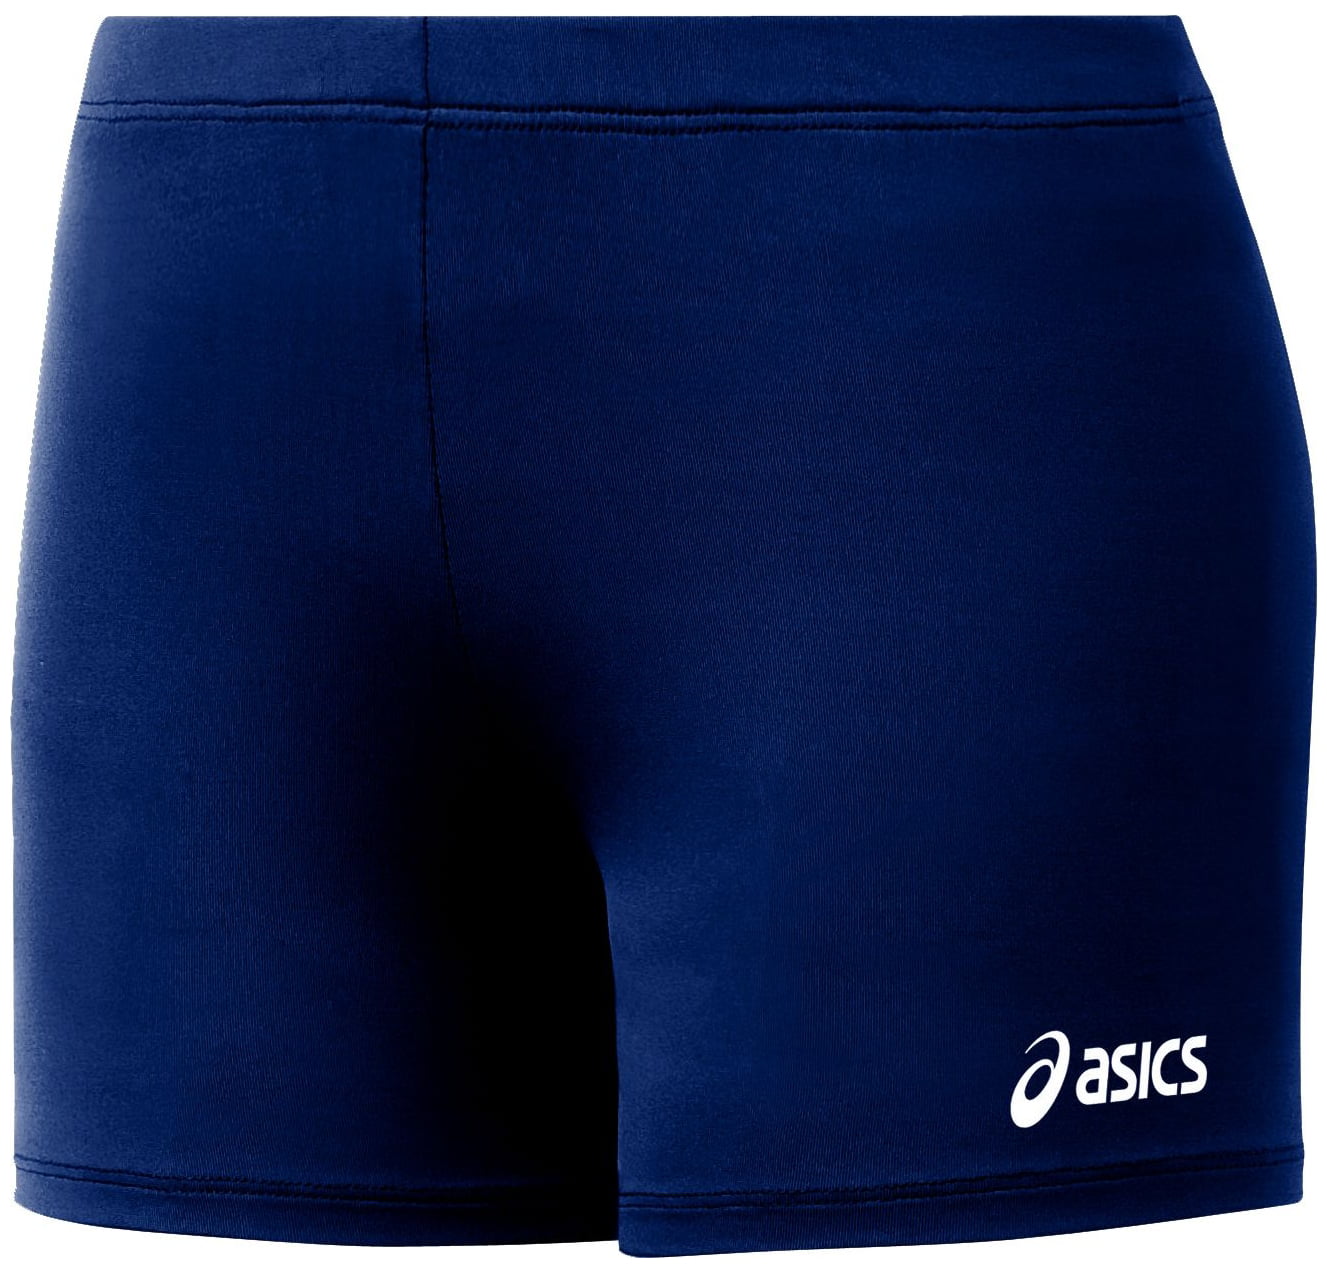 Women's Volleyball 4 Competitive Spandex Shorts Ladies XS - 2XL, 5 Colors 